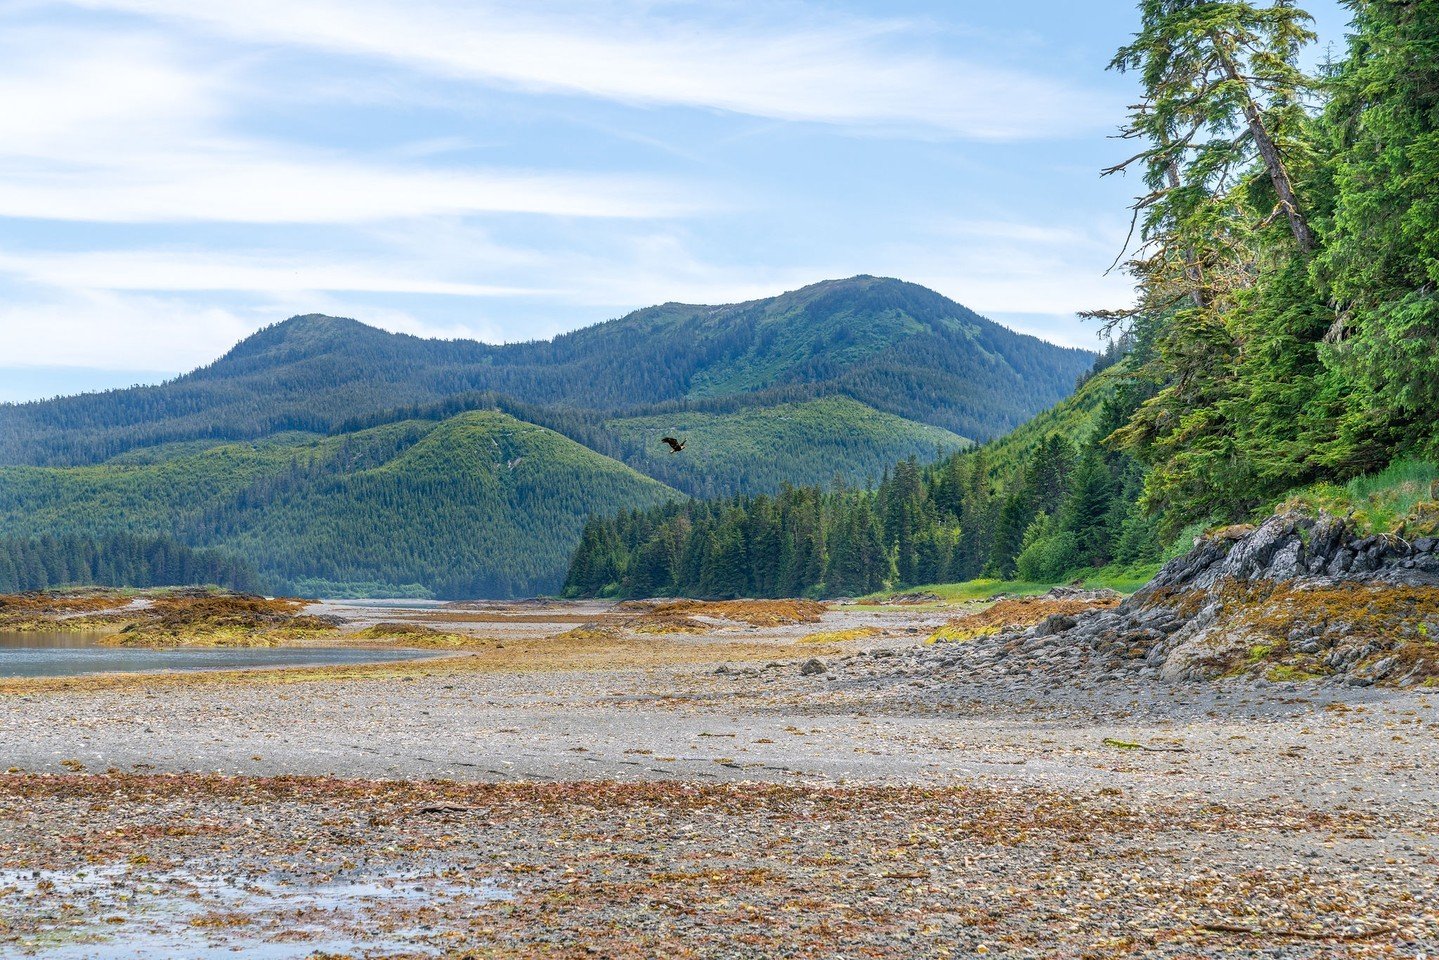 &quot;The USDA Forest Service is starting the process of revising the Tongass National Forest Land Management Plan, which will shape local and regional management for years to come.&quot; 
-Olivia Rose, Petersburg Pilot

#conservation #stewardship #e